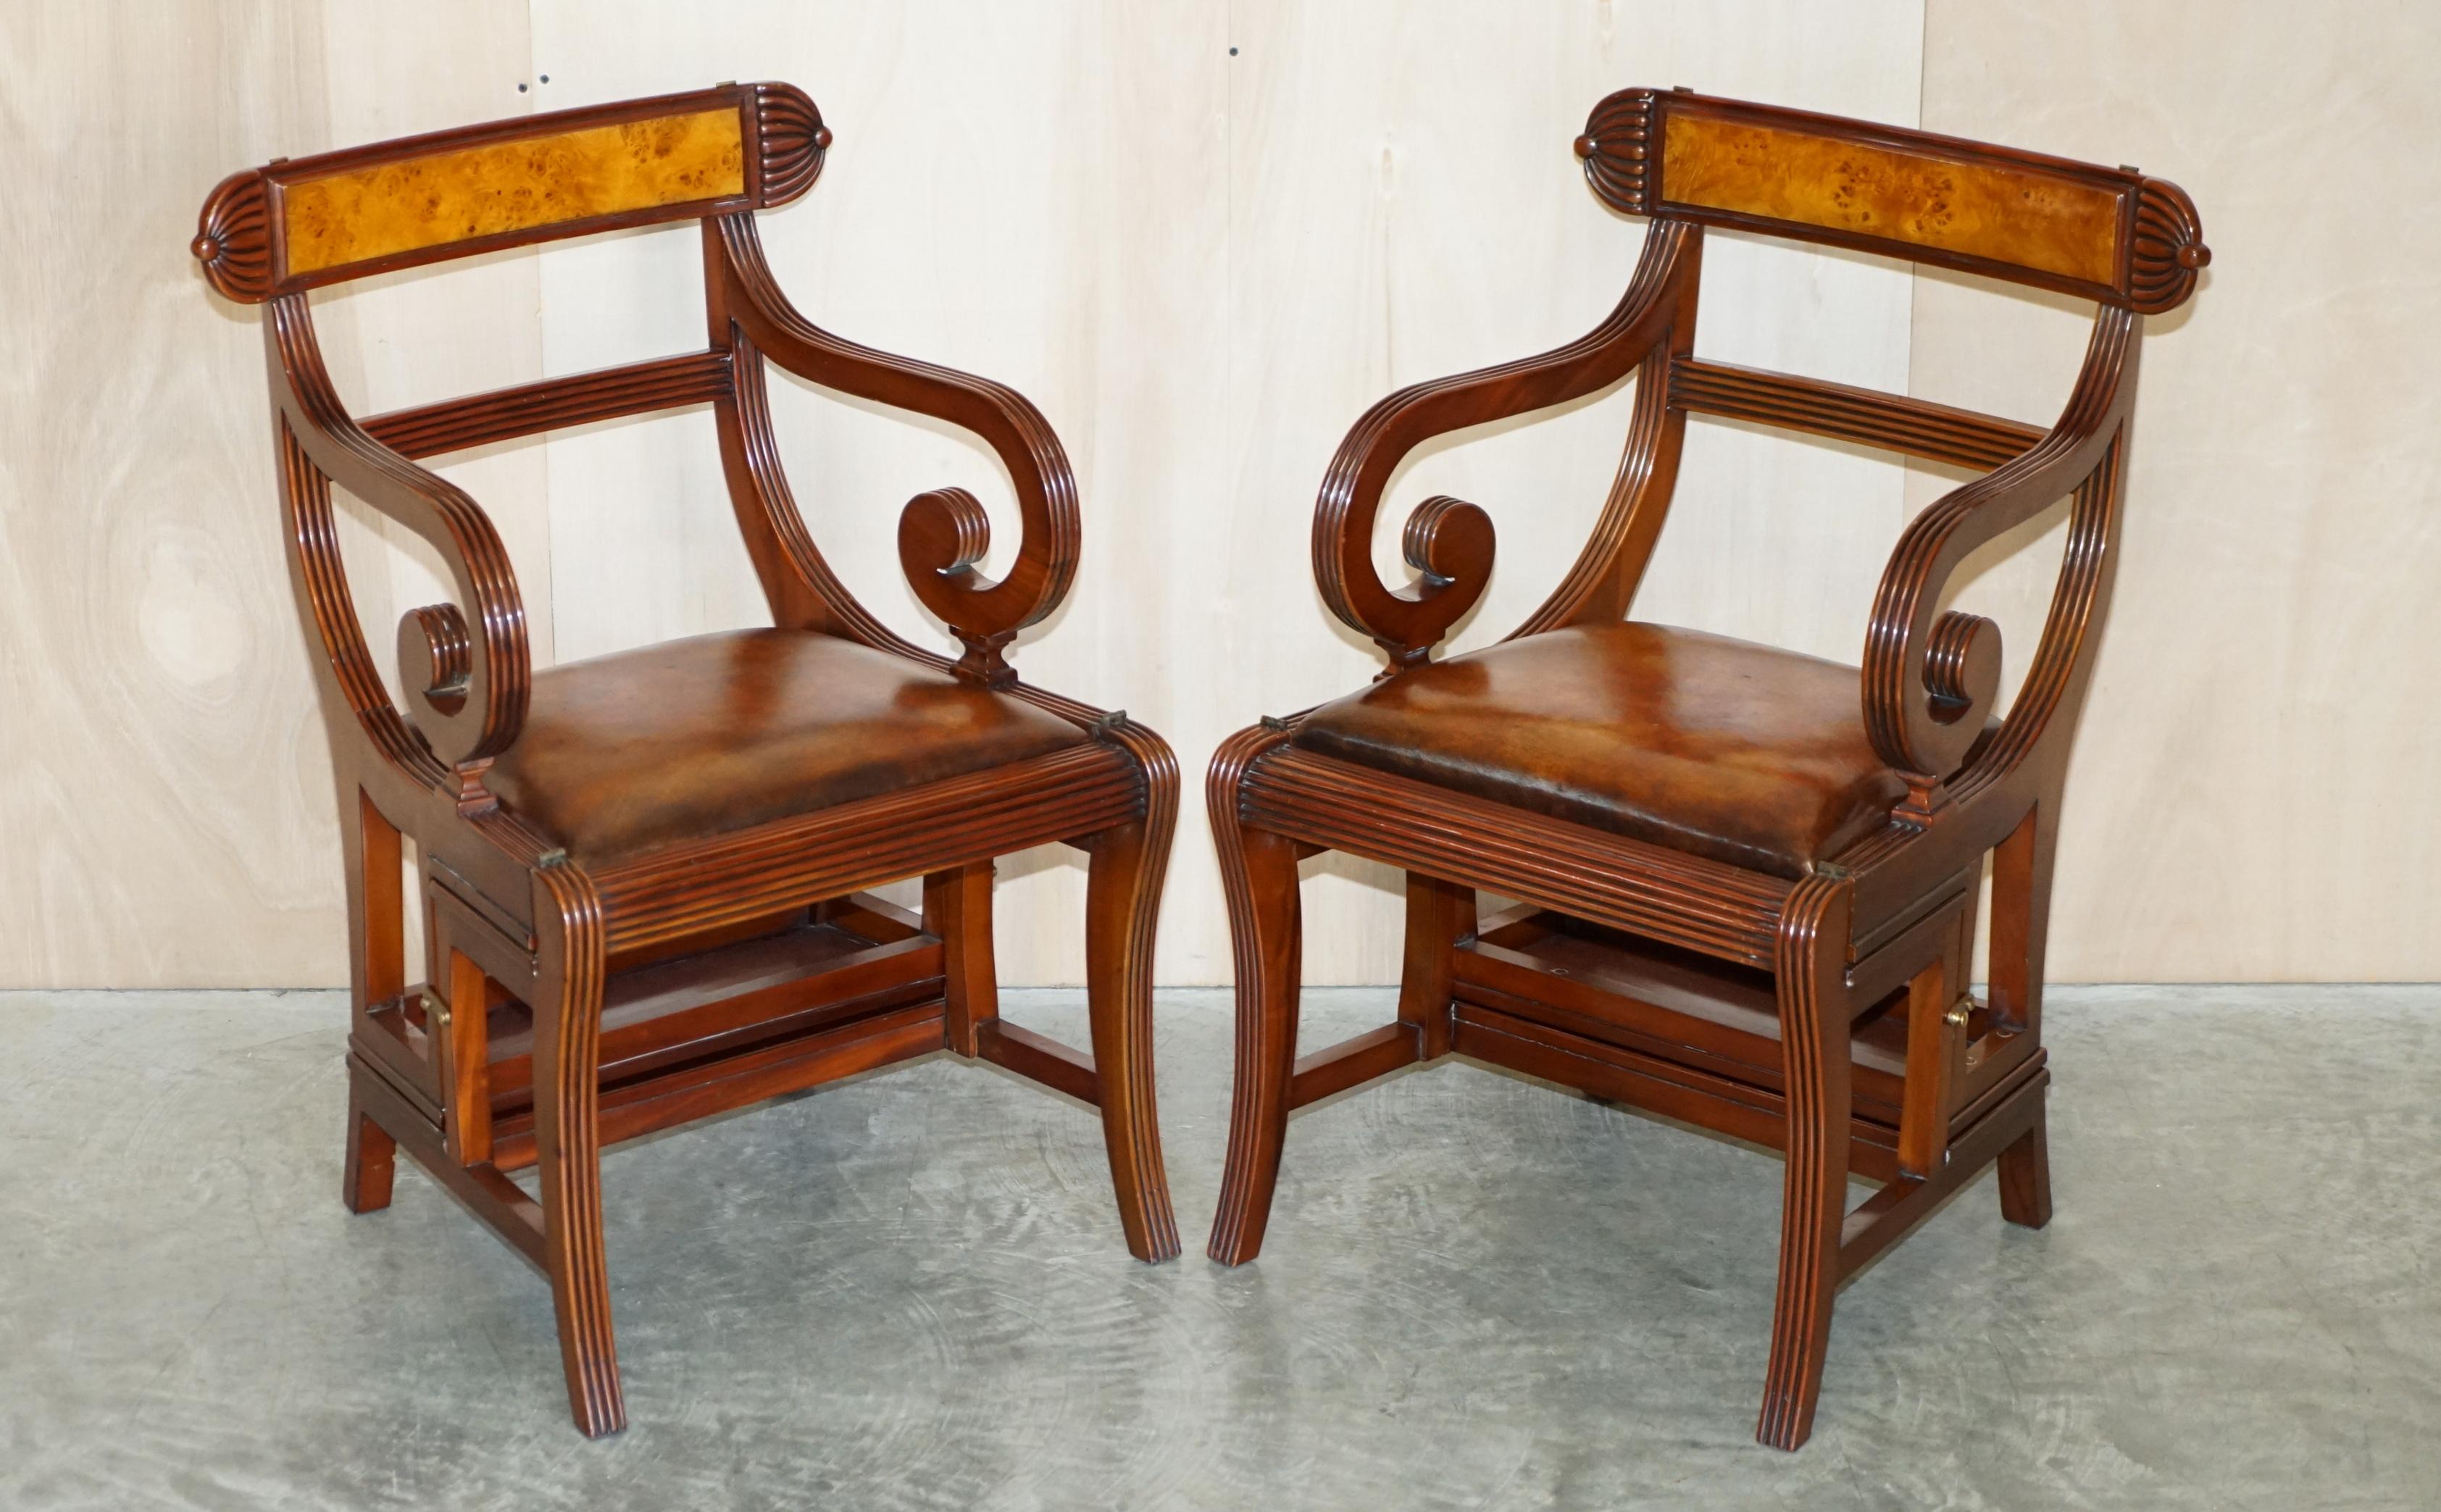 We are delighted to offer for sale this pair of large and collectable Regency style metamorphic armchair which converts into Library steps after the original 18th century design by Gillows of Lancaster with Burr Walnut panels 

A very good looking